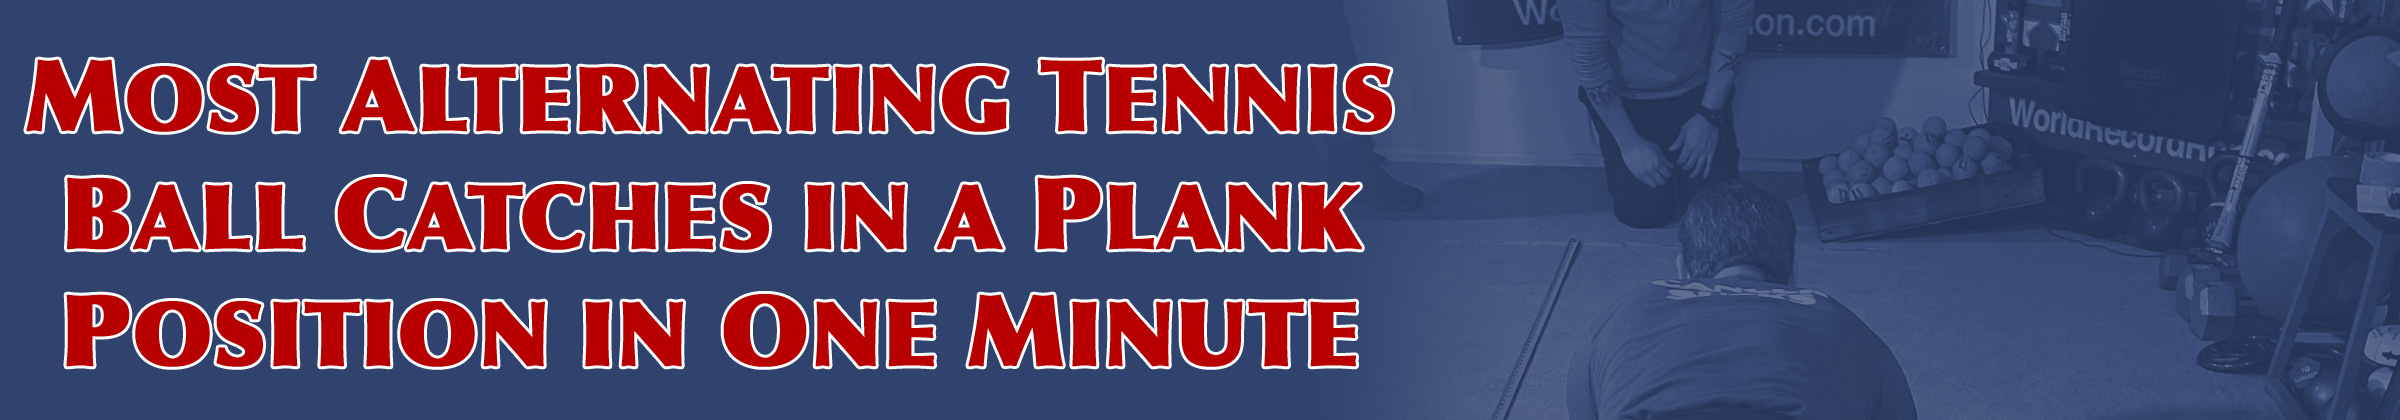 Most Alternating Tennis Ball Catches in a Plank Position in One Minute